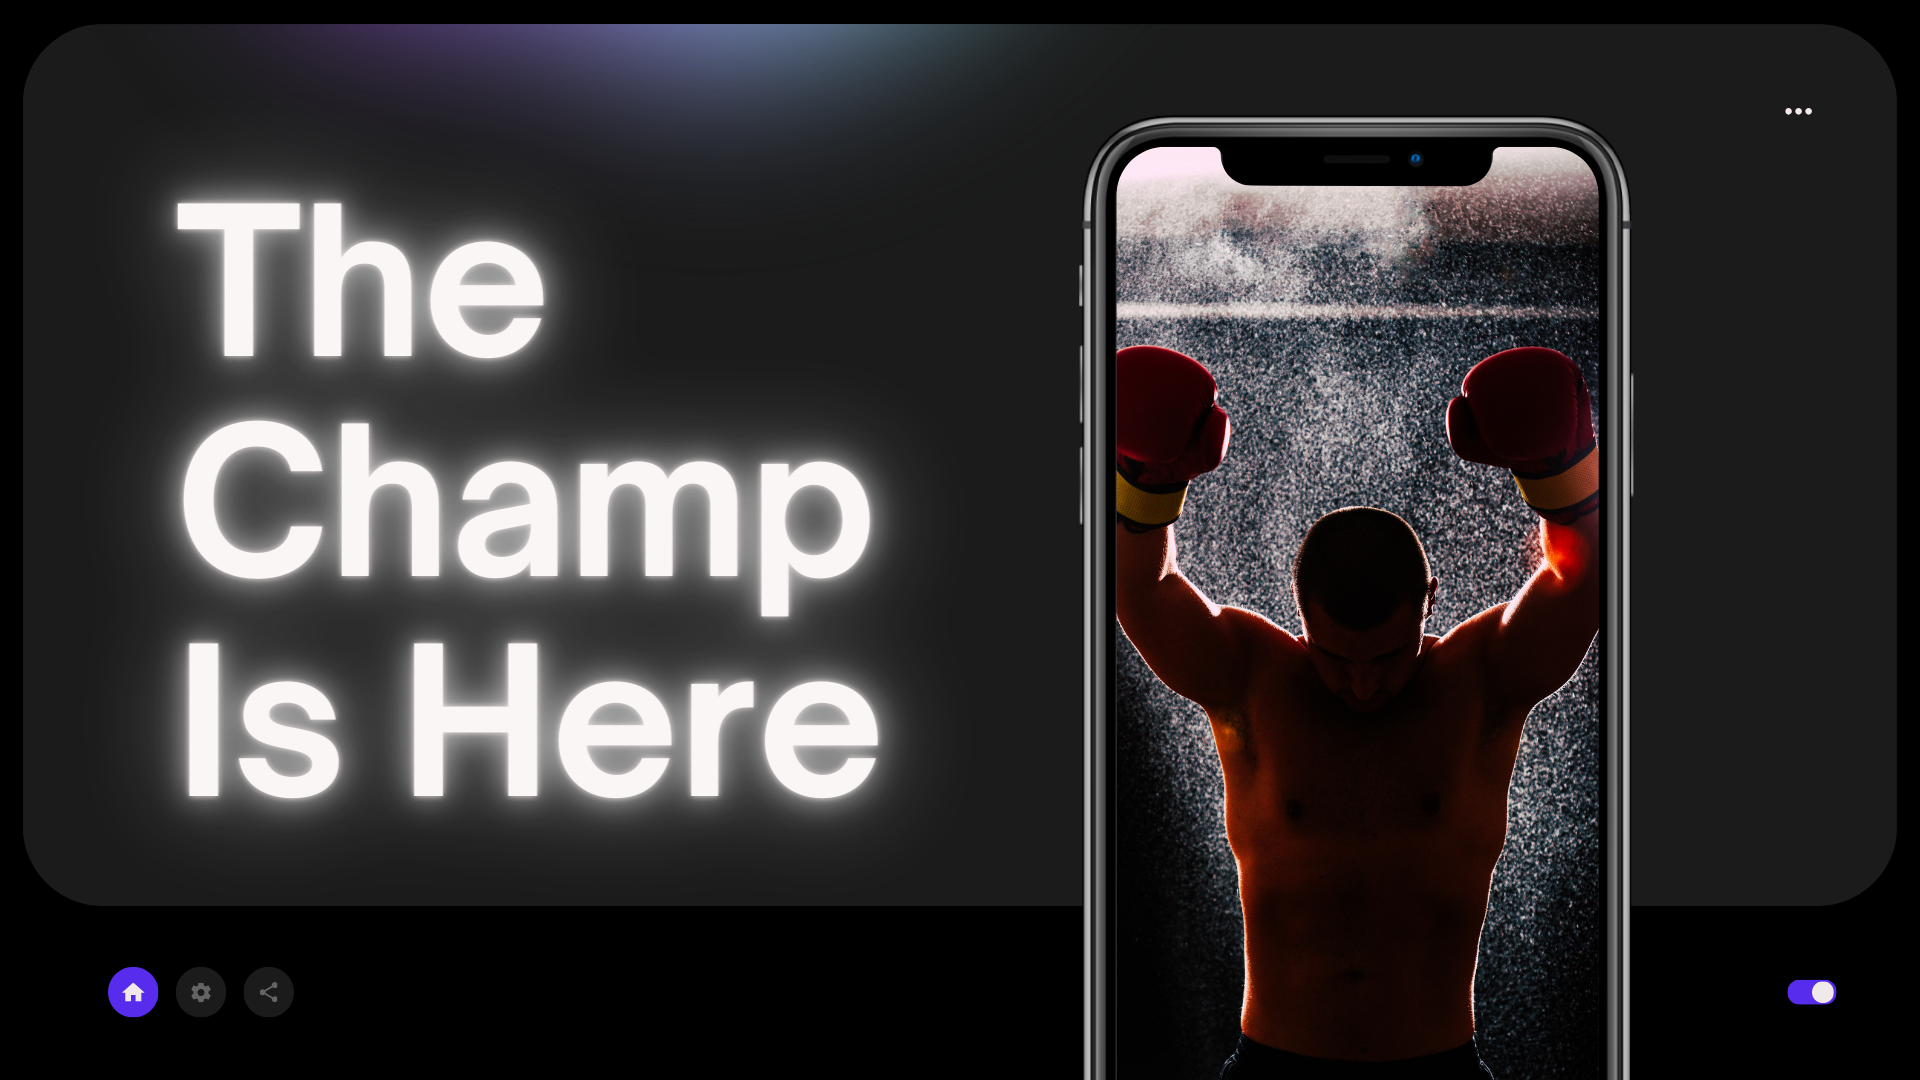 A Call To Worship: The Champ is Here